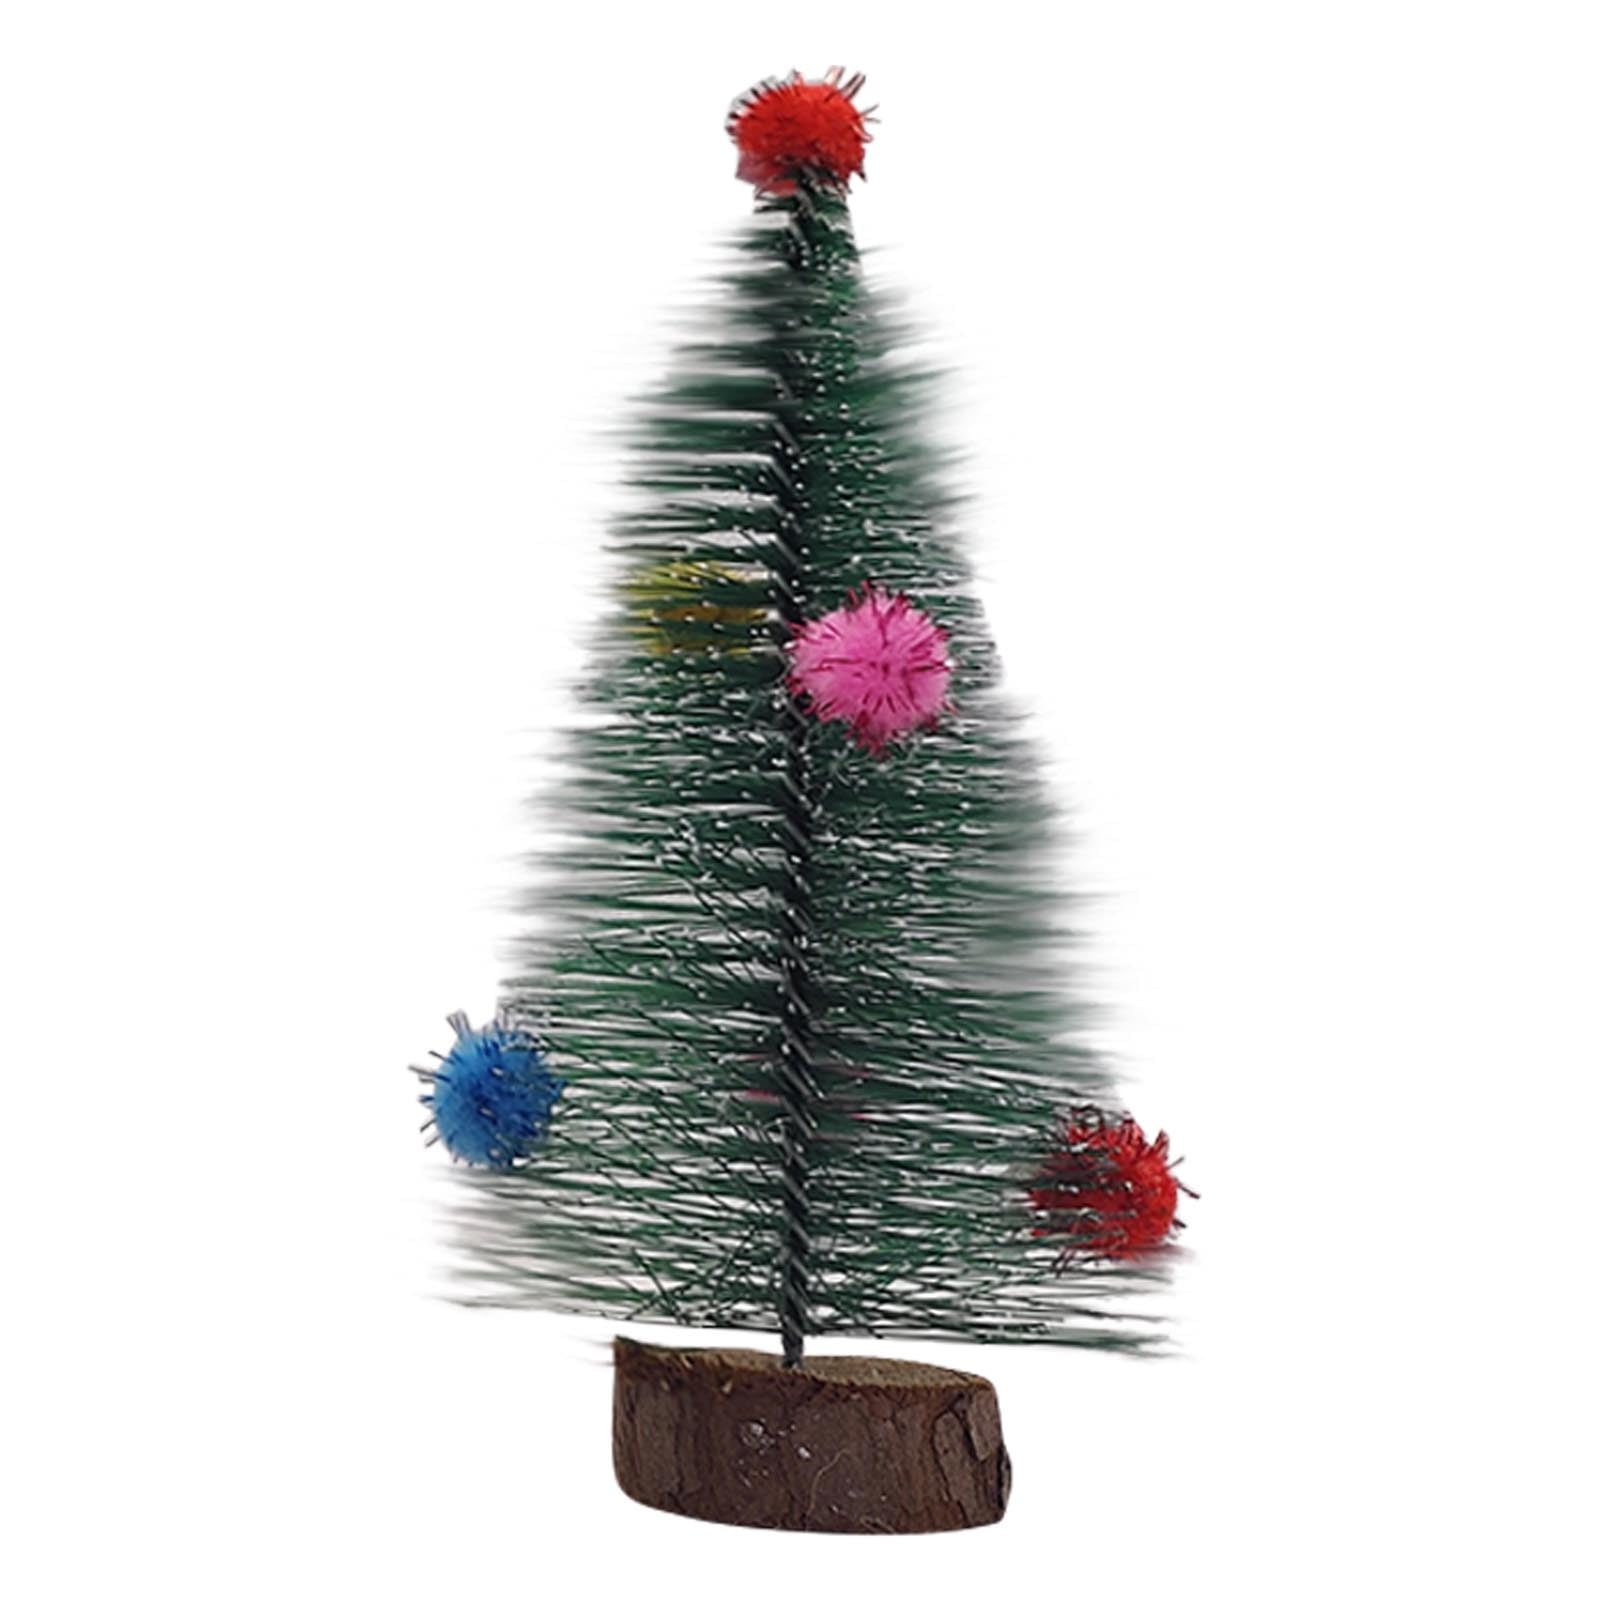 Why does that Christmas tree look like a bunch of toilet brushes?